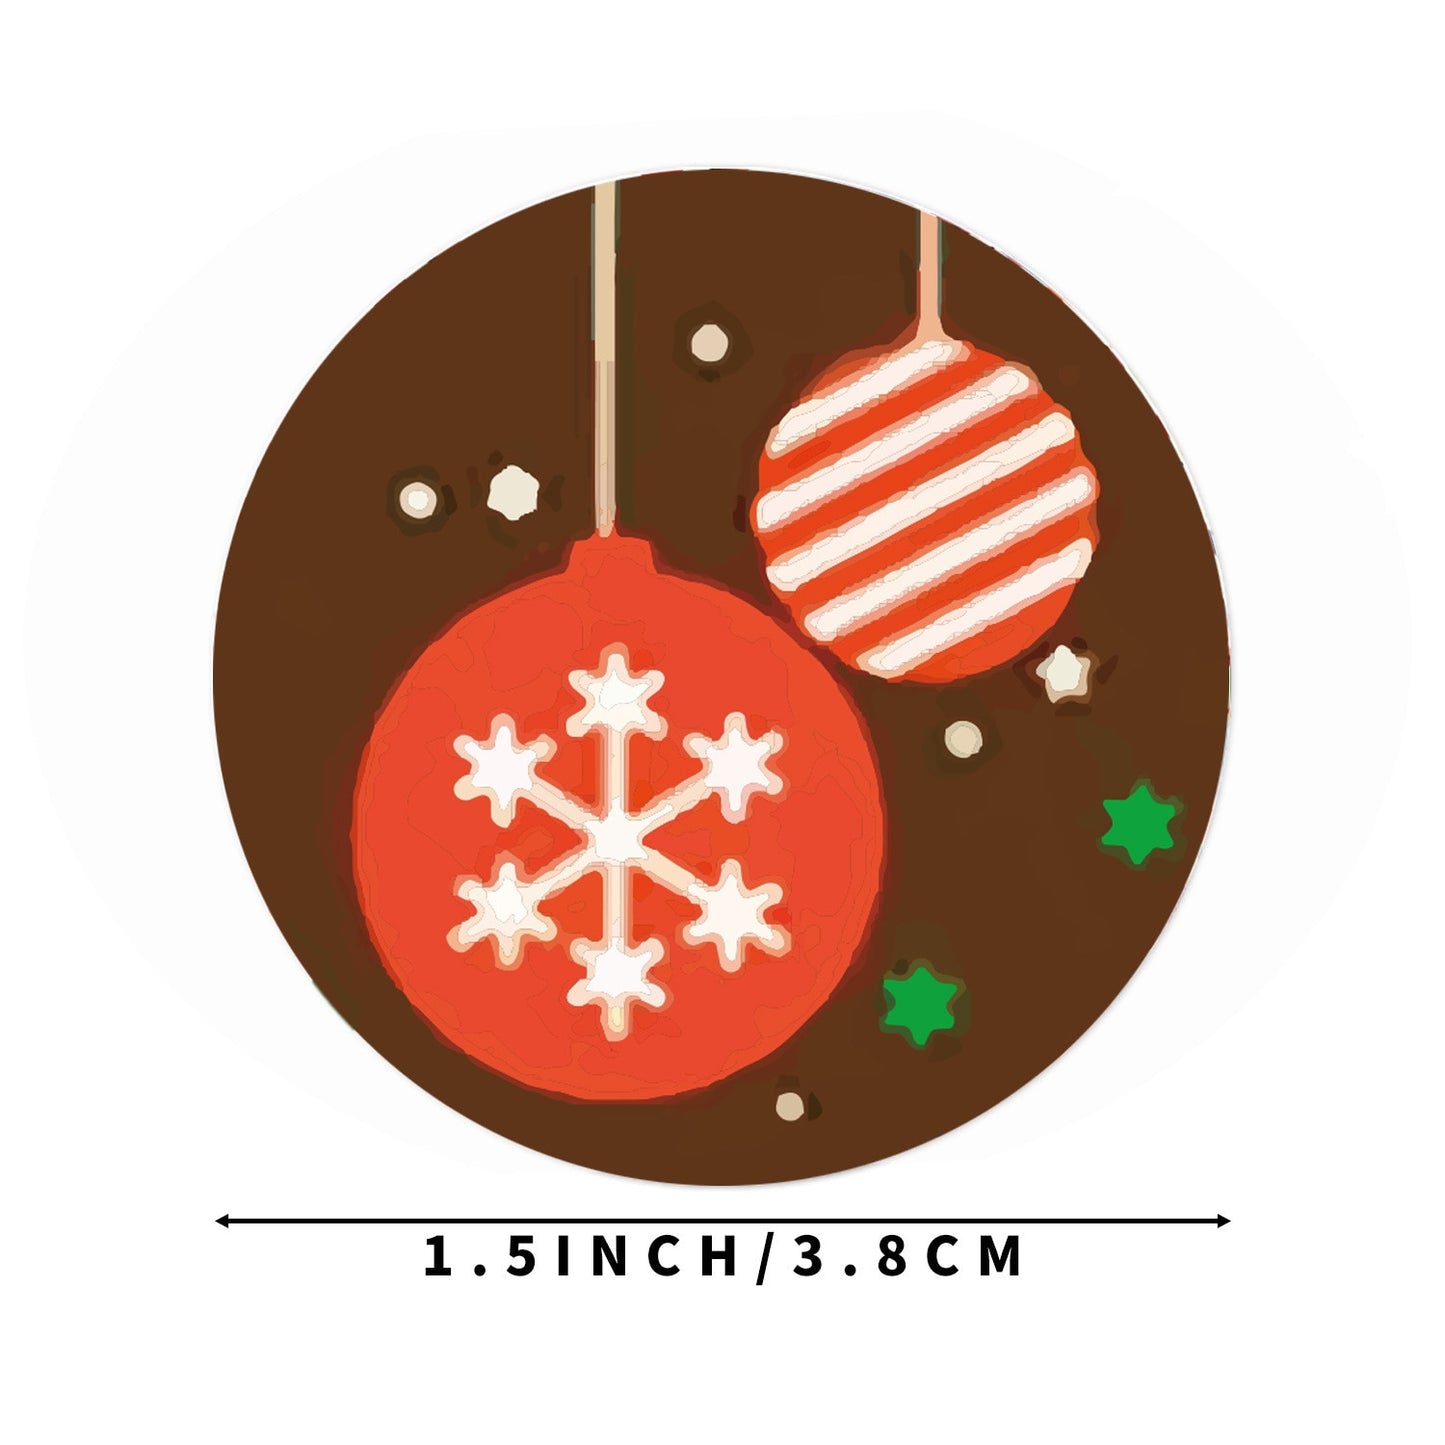 Merry Christmas stickers